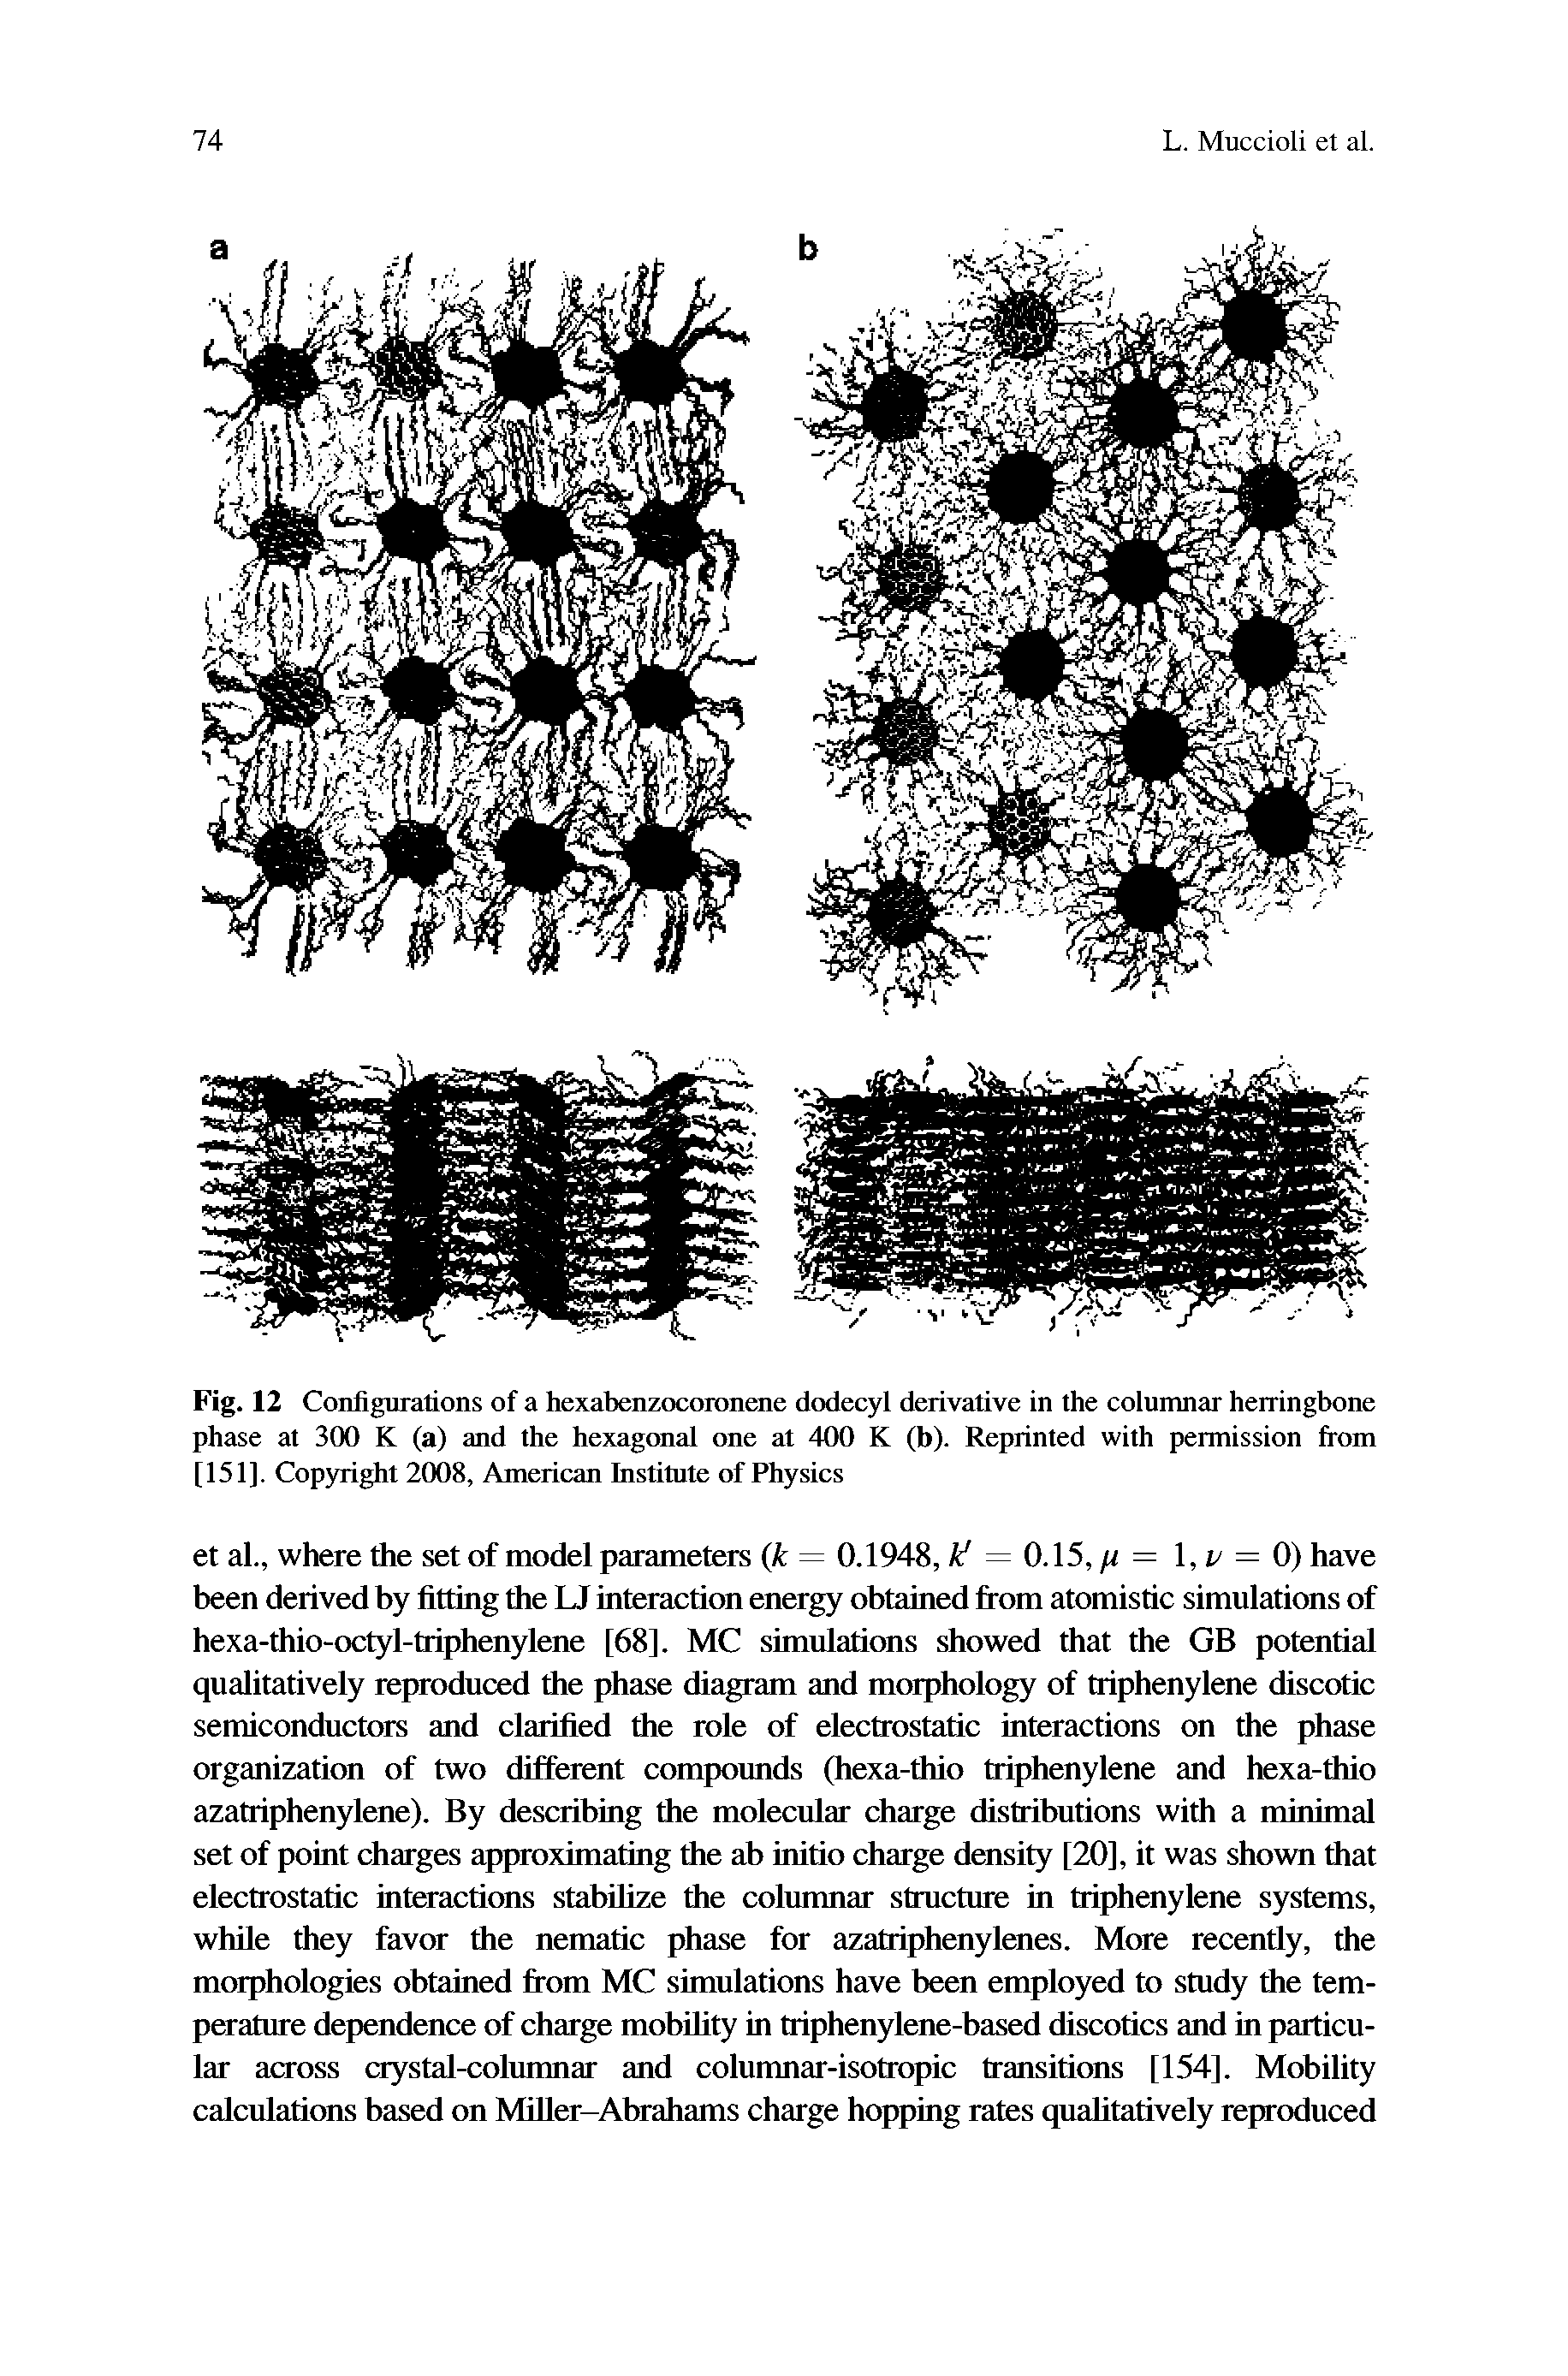 Fig. 12 Configurations of a hexabenzocoronene dodecyl derivative in the columnar herringbone phase at 300 K (a) and the hexagonal one at 400 K (b). Reprinted with permission from [151], Copyright 2008, American Institute of Physics...